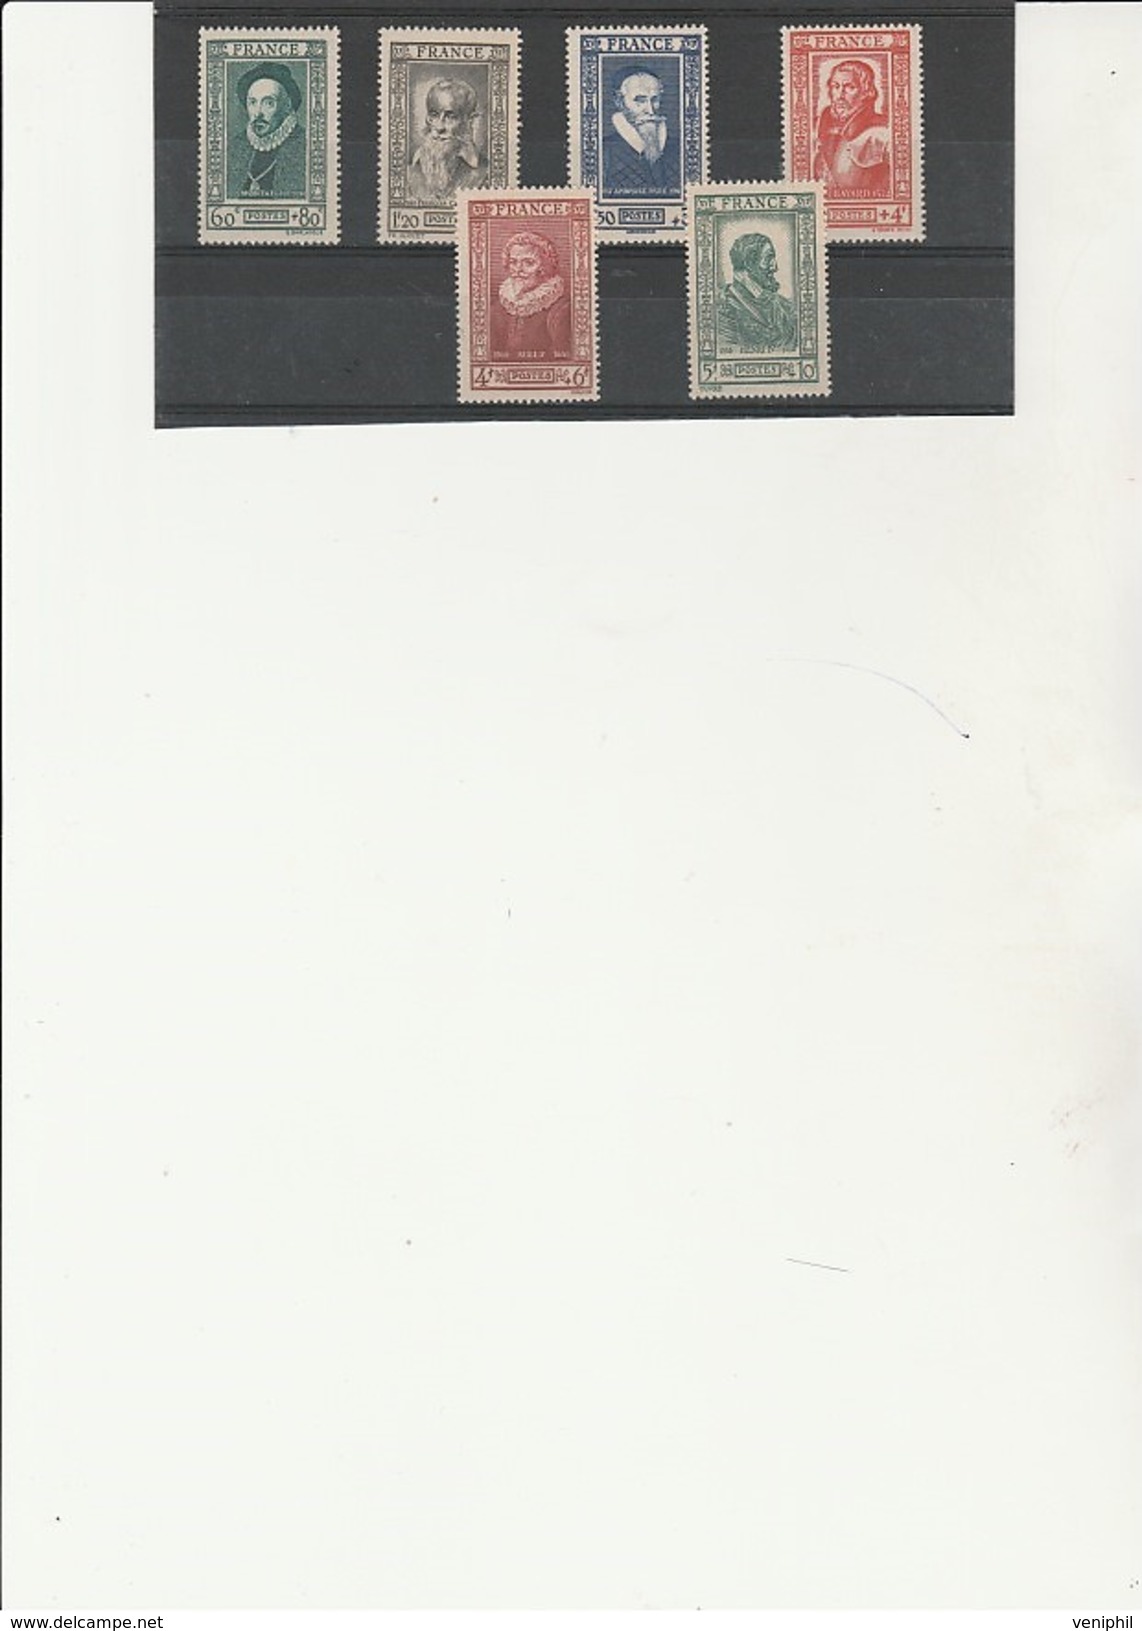 TIMBRES  CELEBRITES - N° 587 A 592 NEUF SANS CHARNIERE -ANNEE 1943 - COTE : 15 € - Nuovi